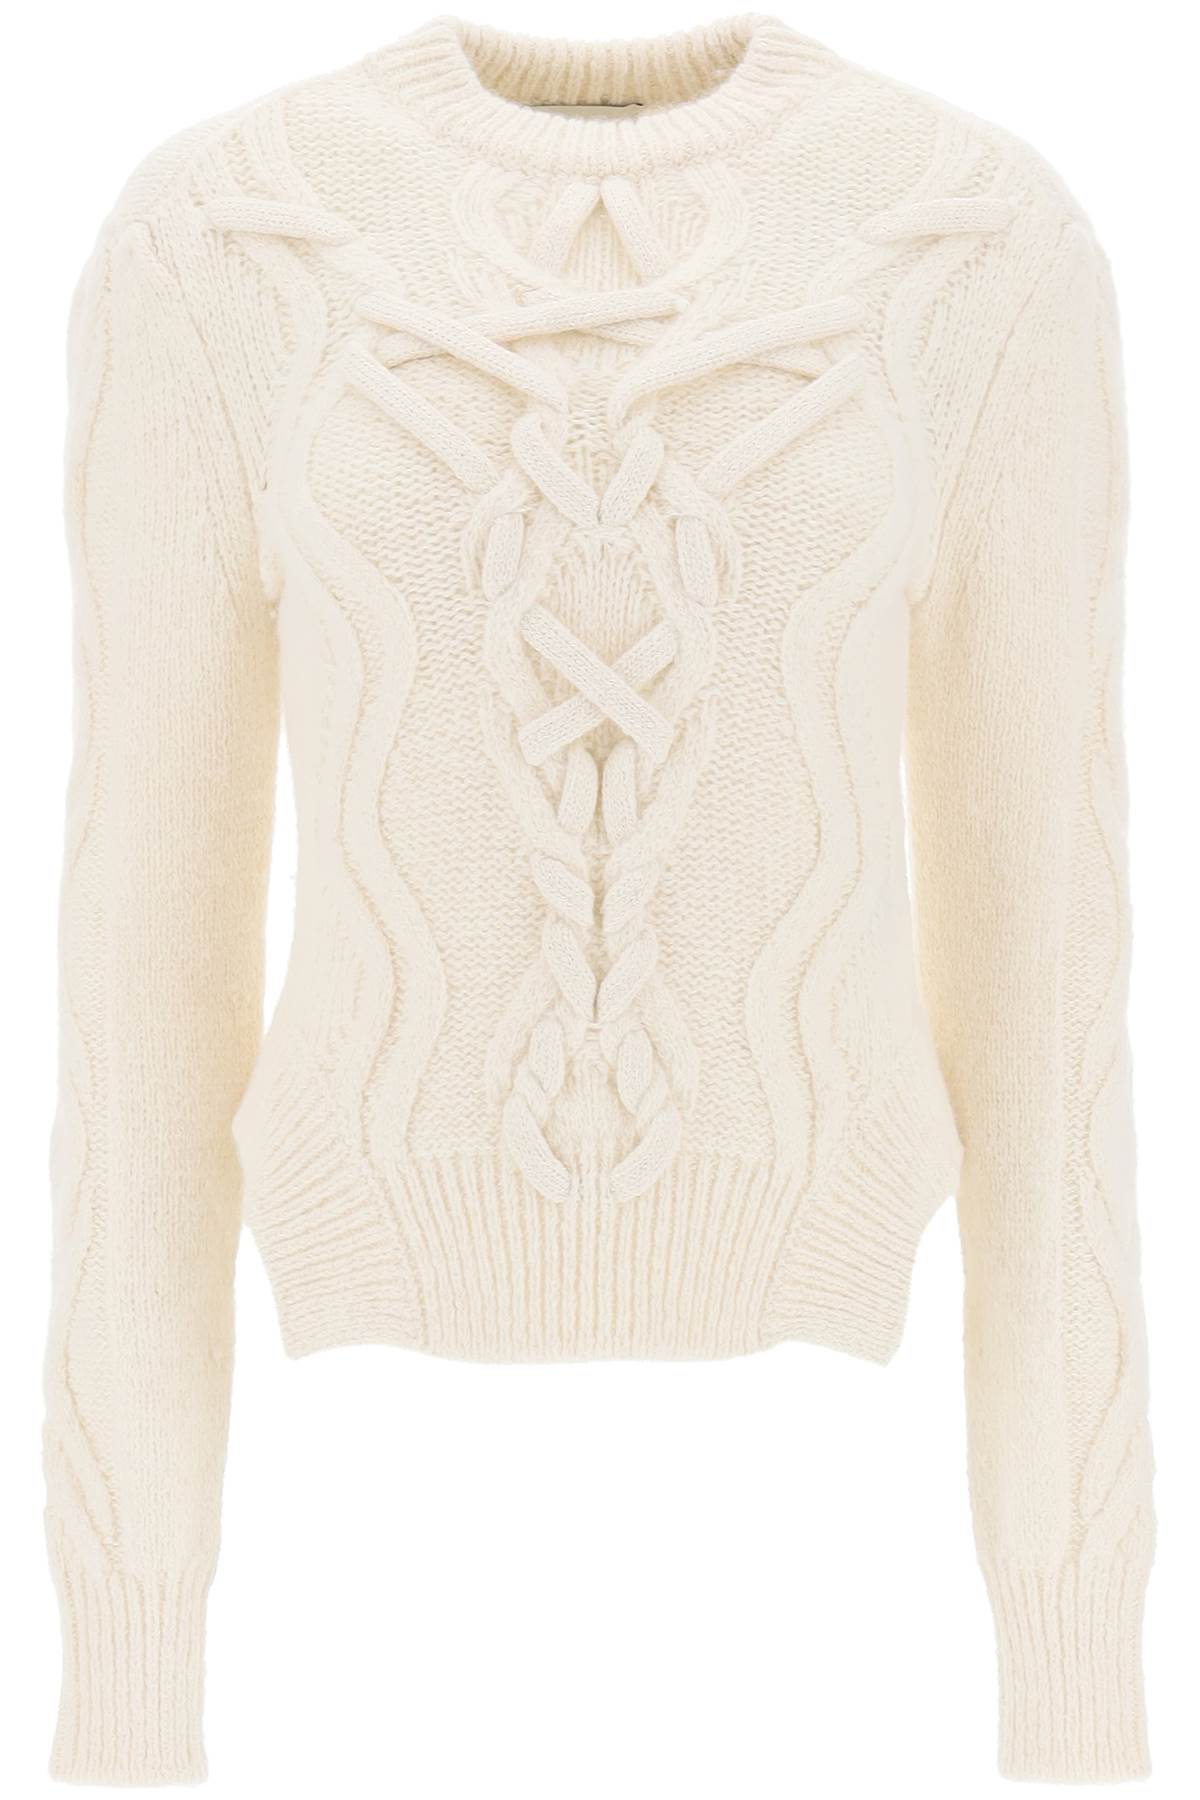 Isabel marant elvy cable knit sweater-0